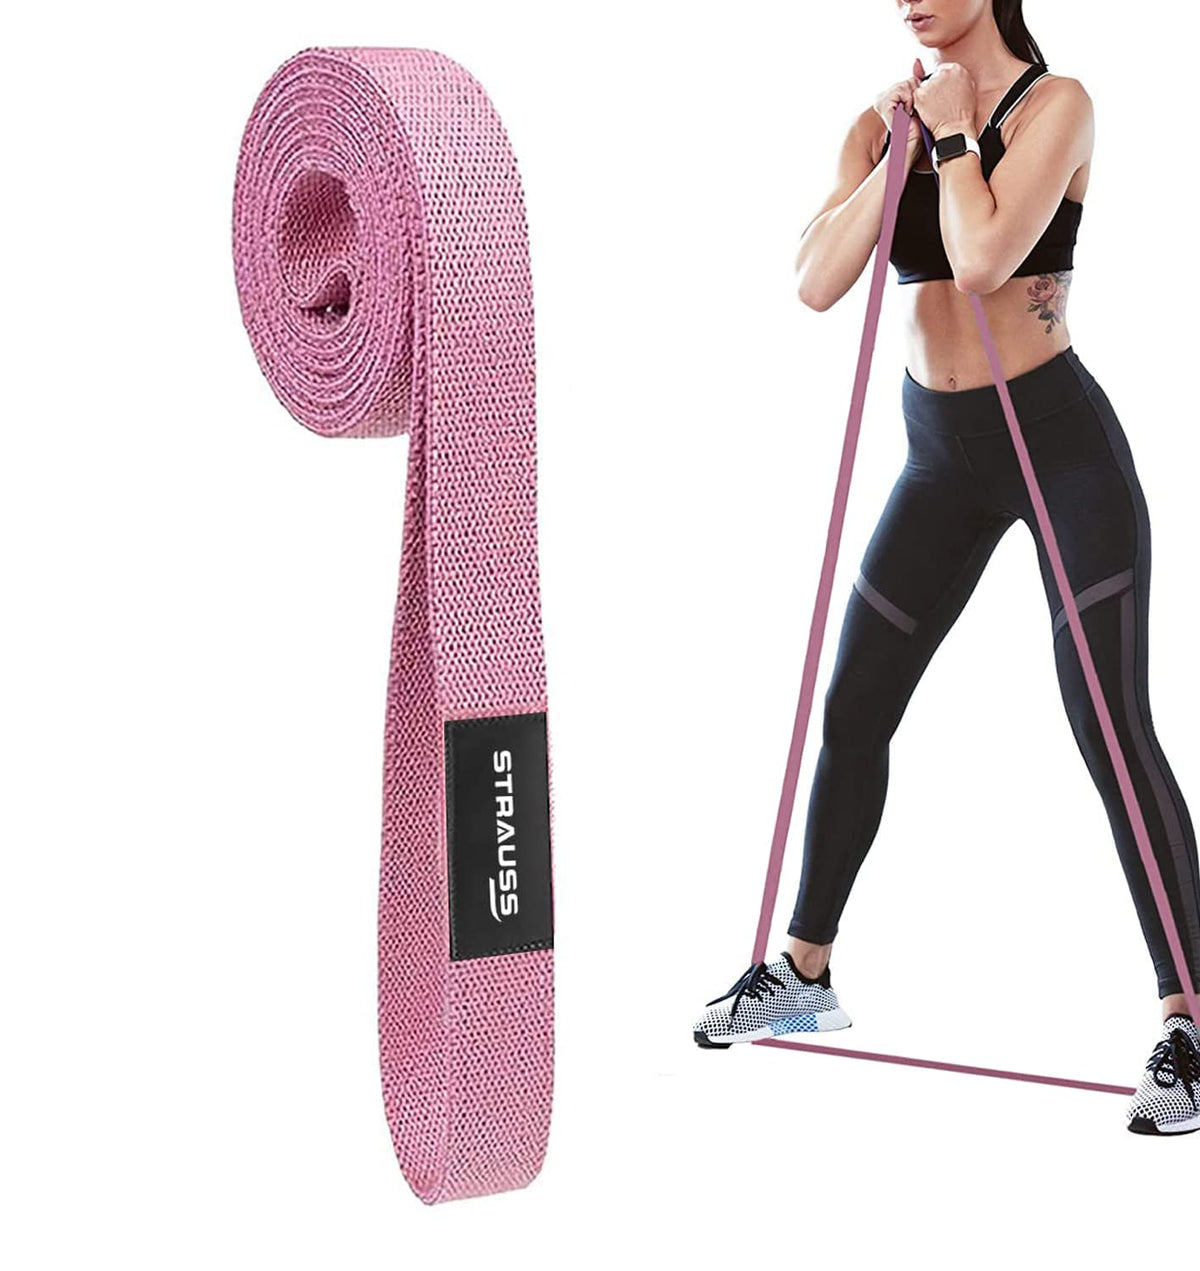 Strauss Yoga Resistance Bands For Workout, Stretch Band, Theraband, Exercise Band Resistance Band - Buy Strauss Yoga Resistance Bands For  Workout, Stretch Band, Theraband